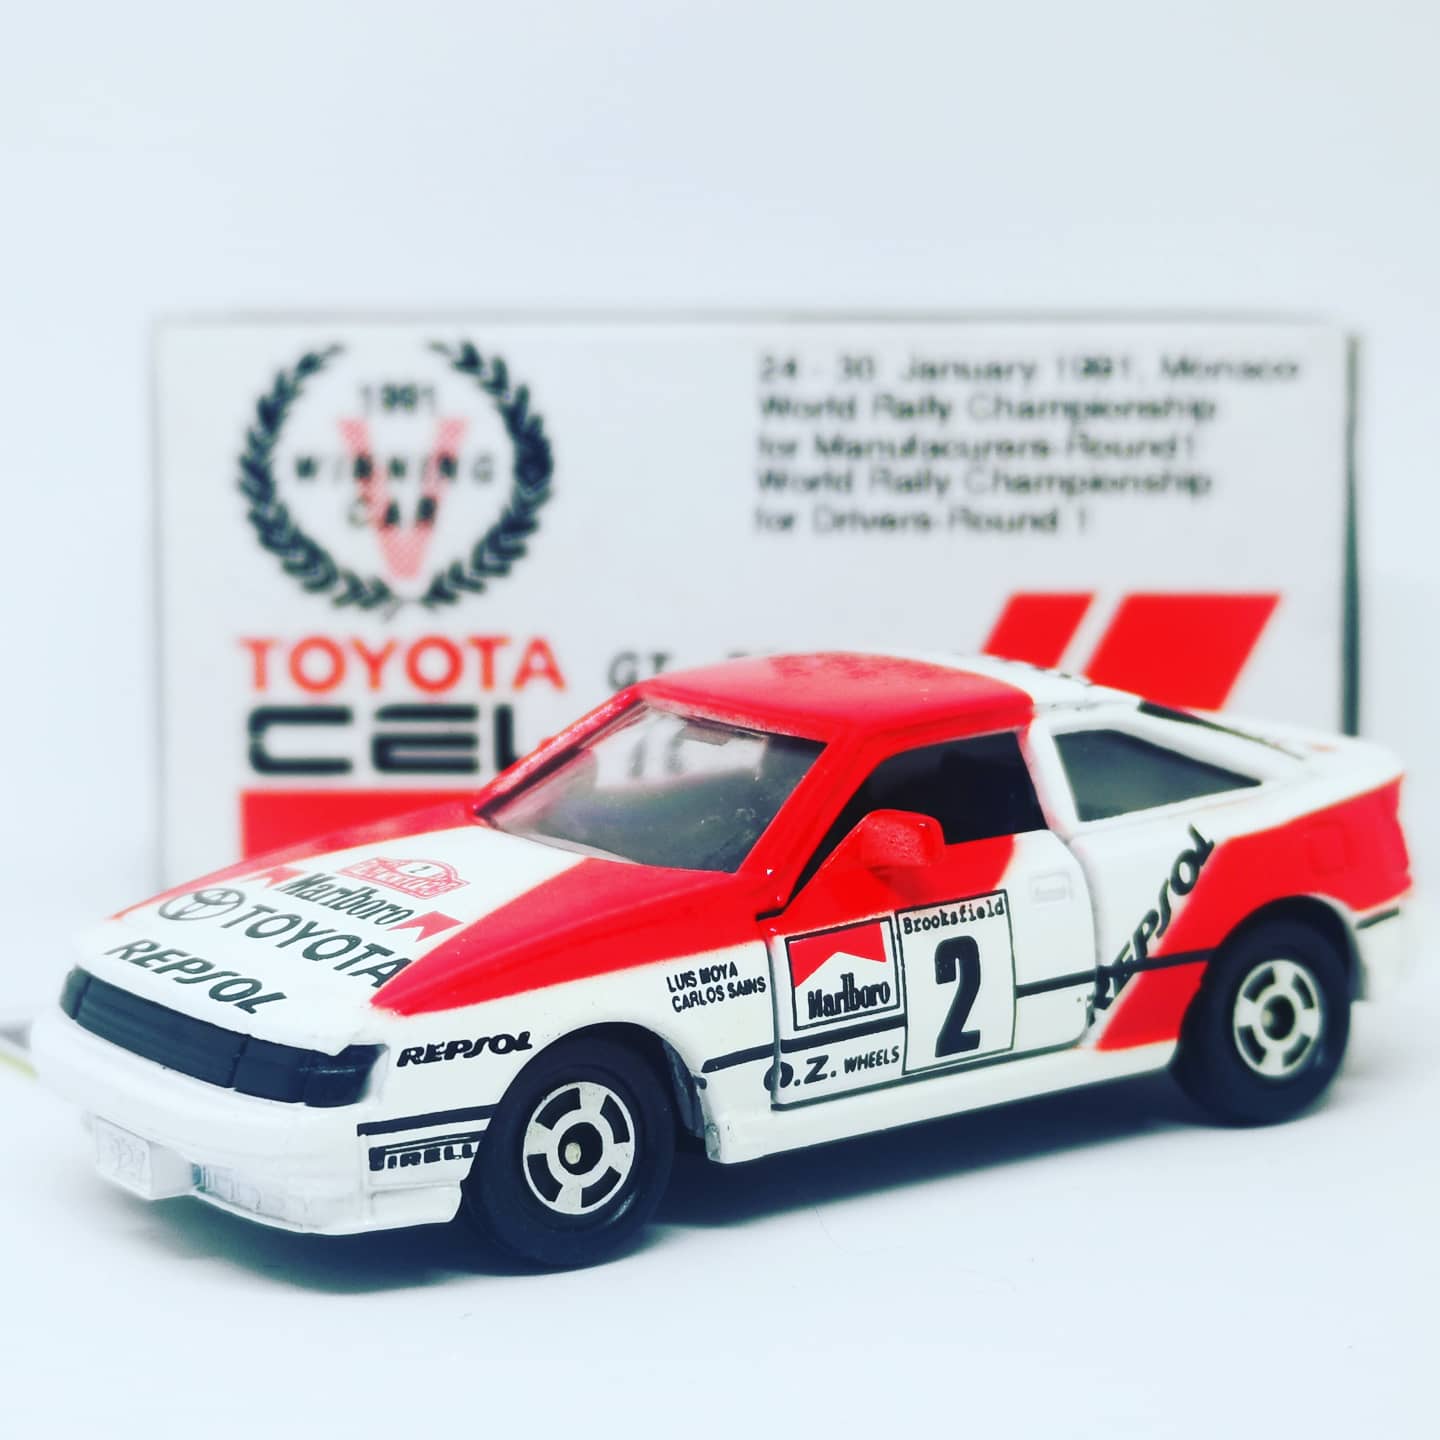 Tomica Toyota Celica GT Four St165
1991 59tg Monte Carlo WRC Winning Car 1:58 Scale